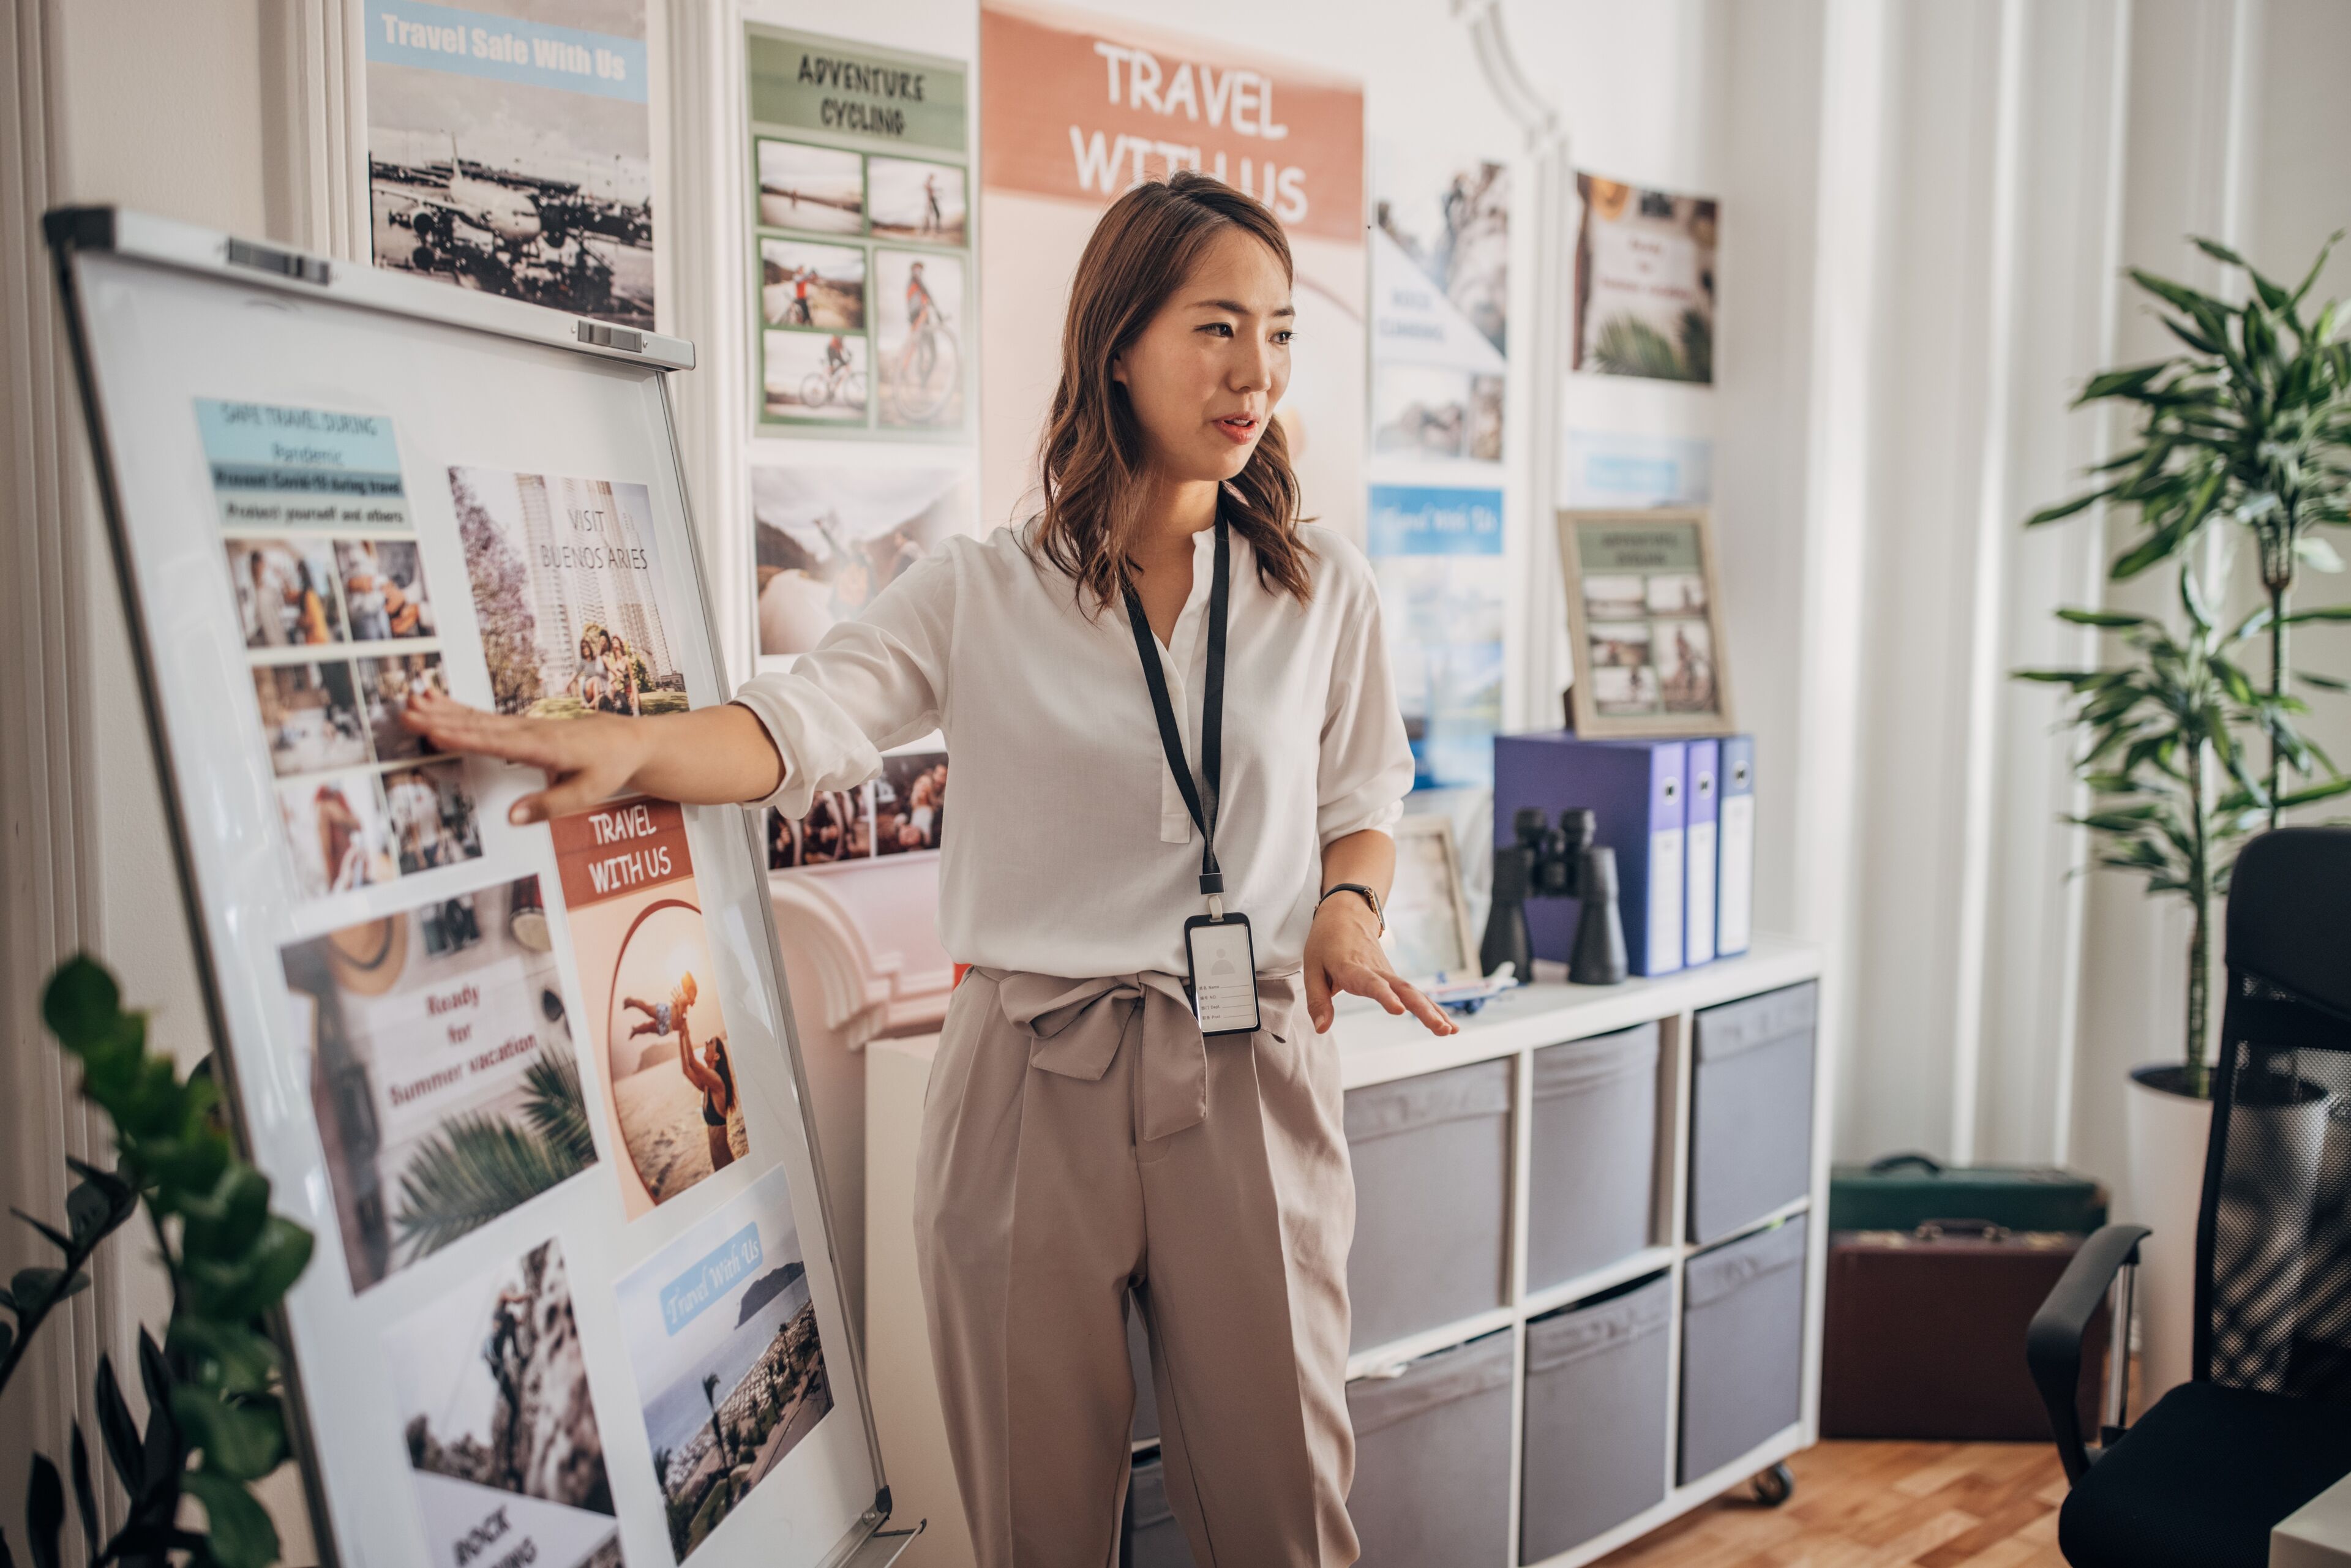 A poised woman presents travel options, pointing to posters in a bright travel agency office.